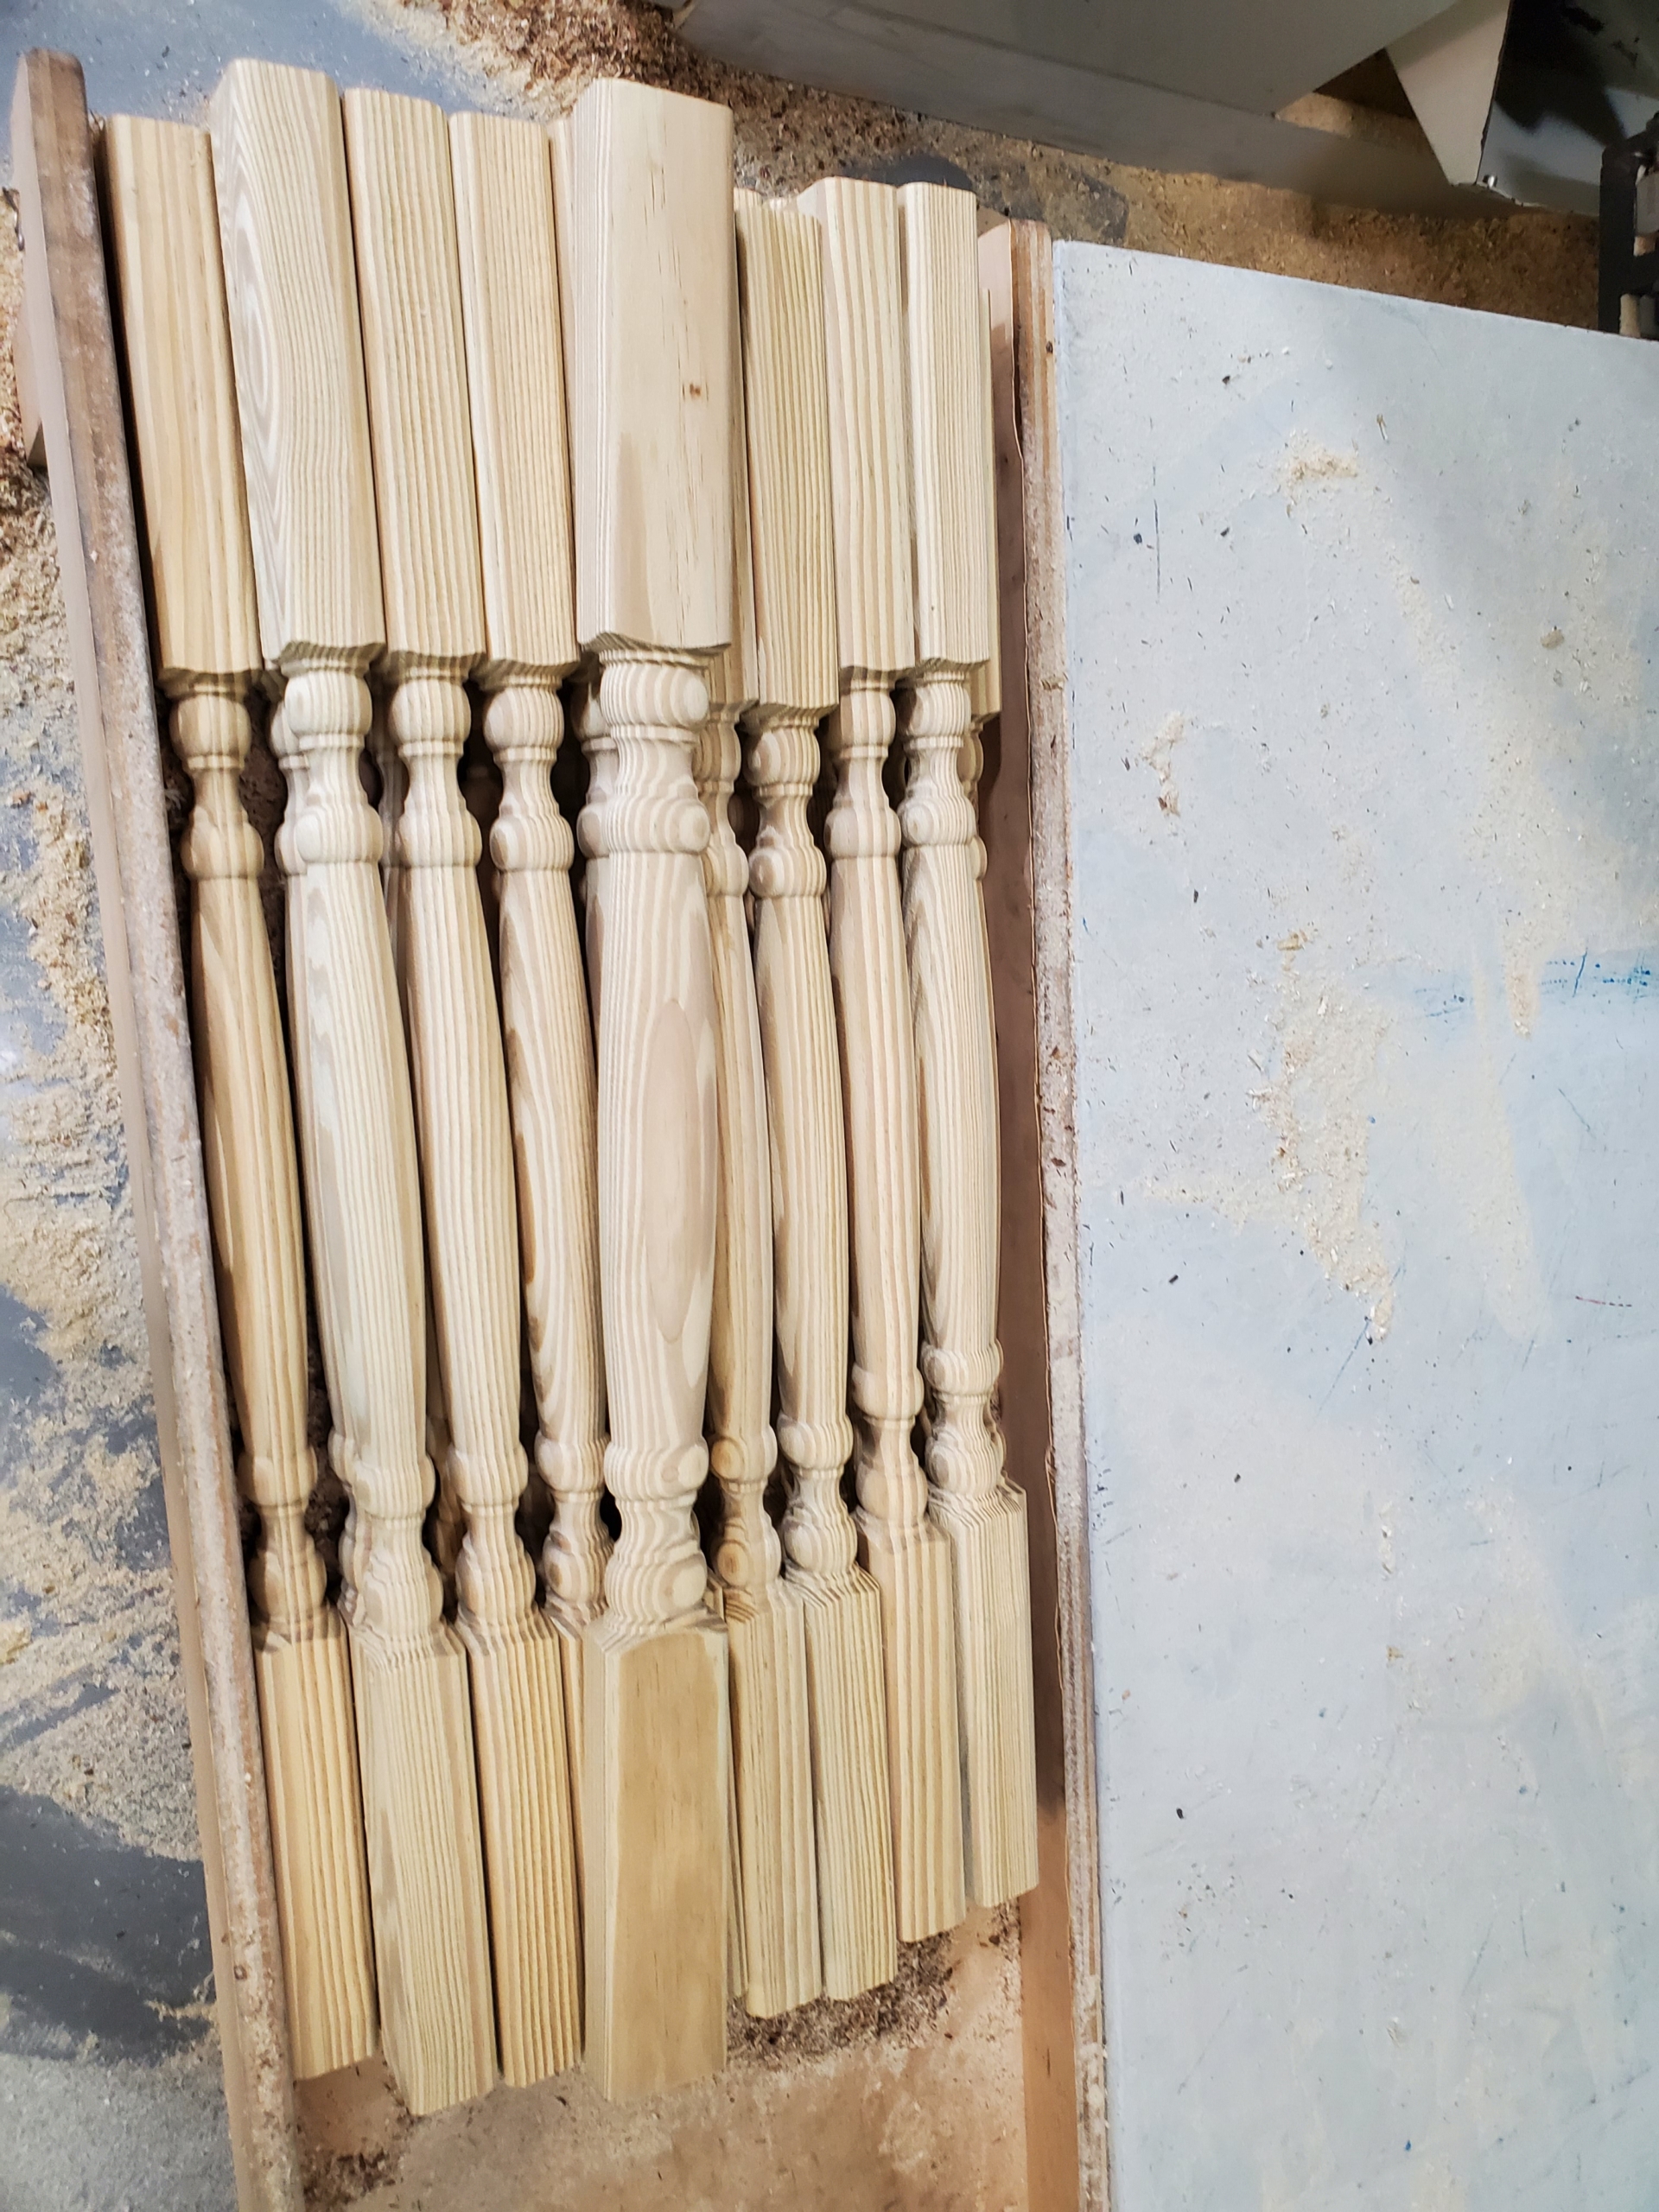 Dry pressure-treated yellow pine oval balusters.